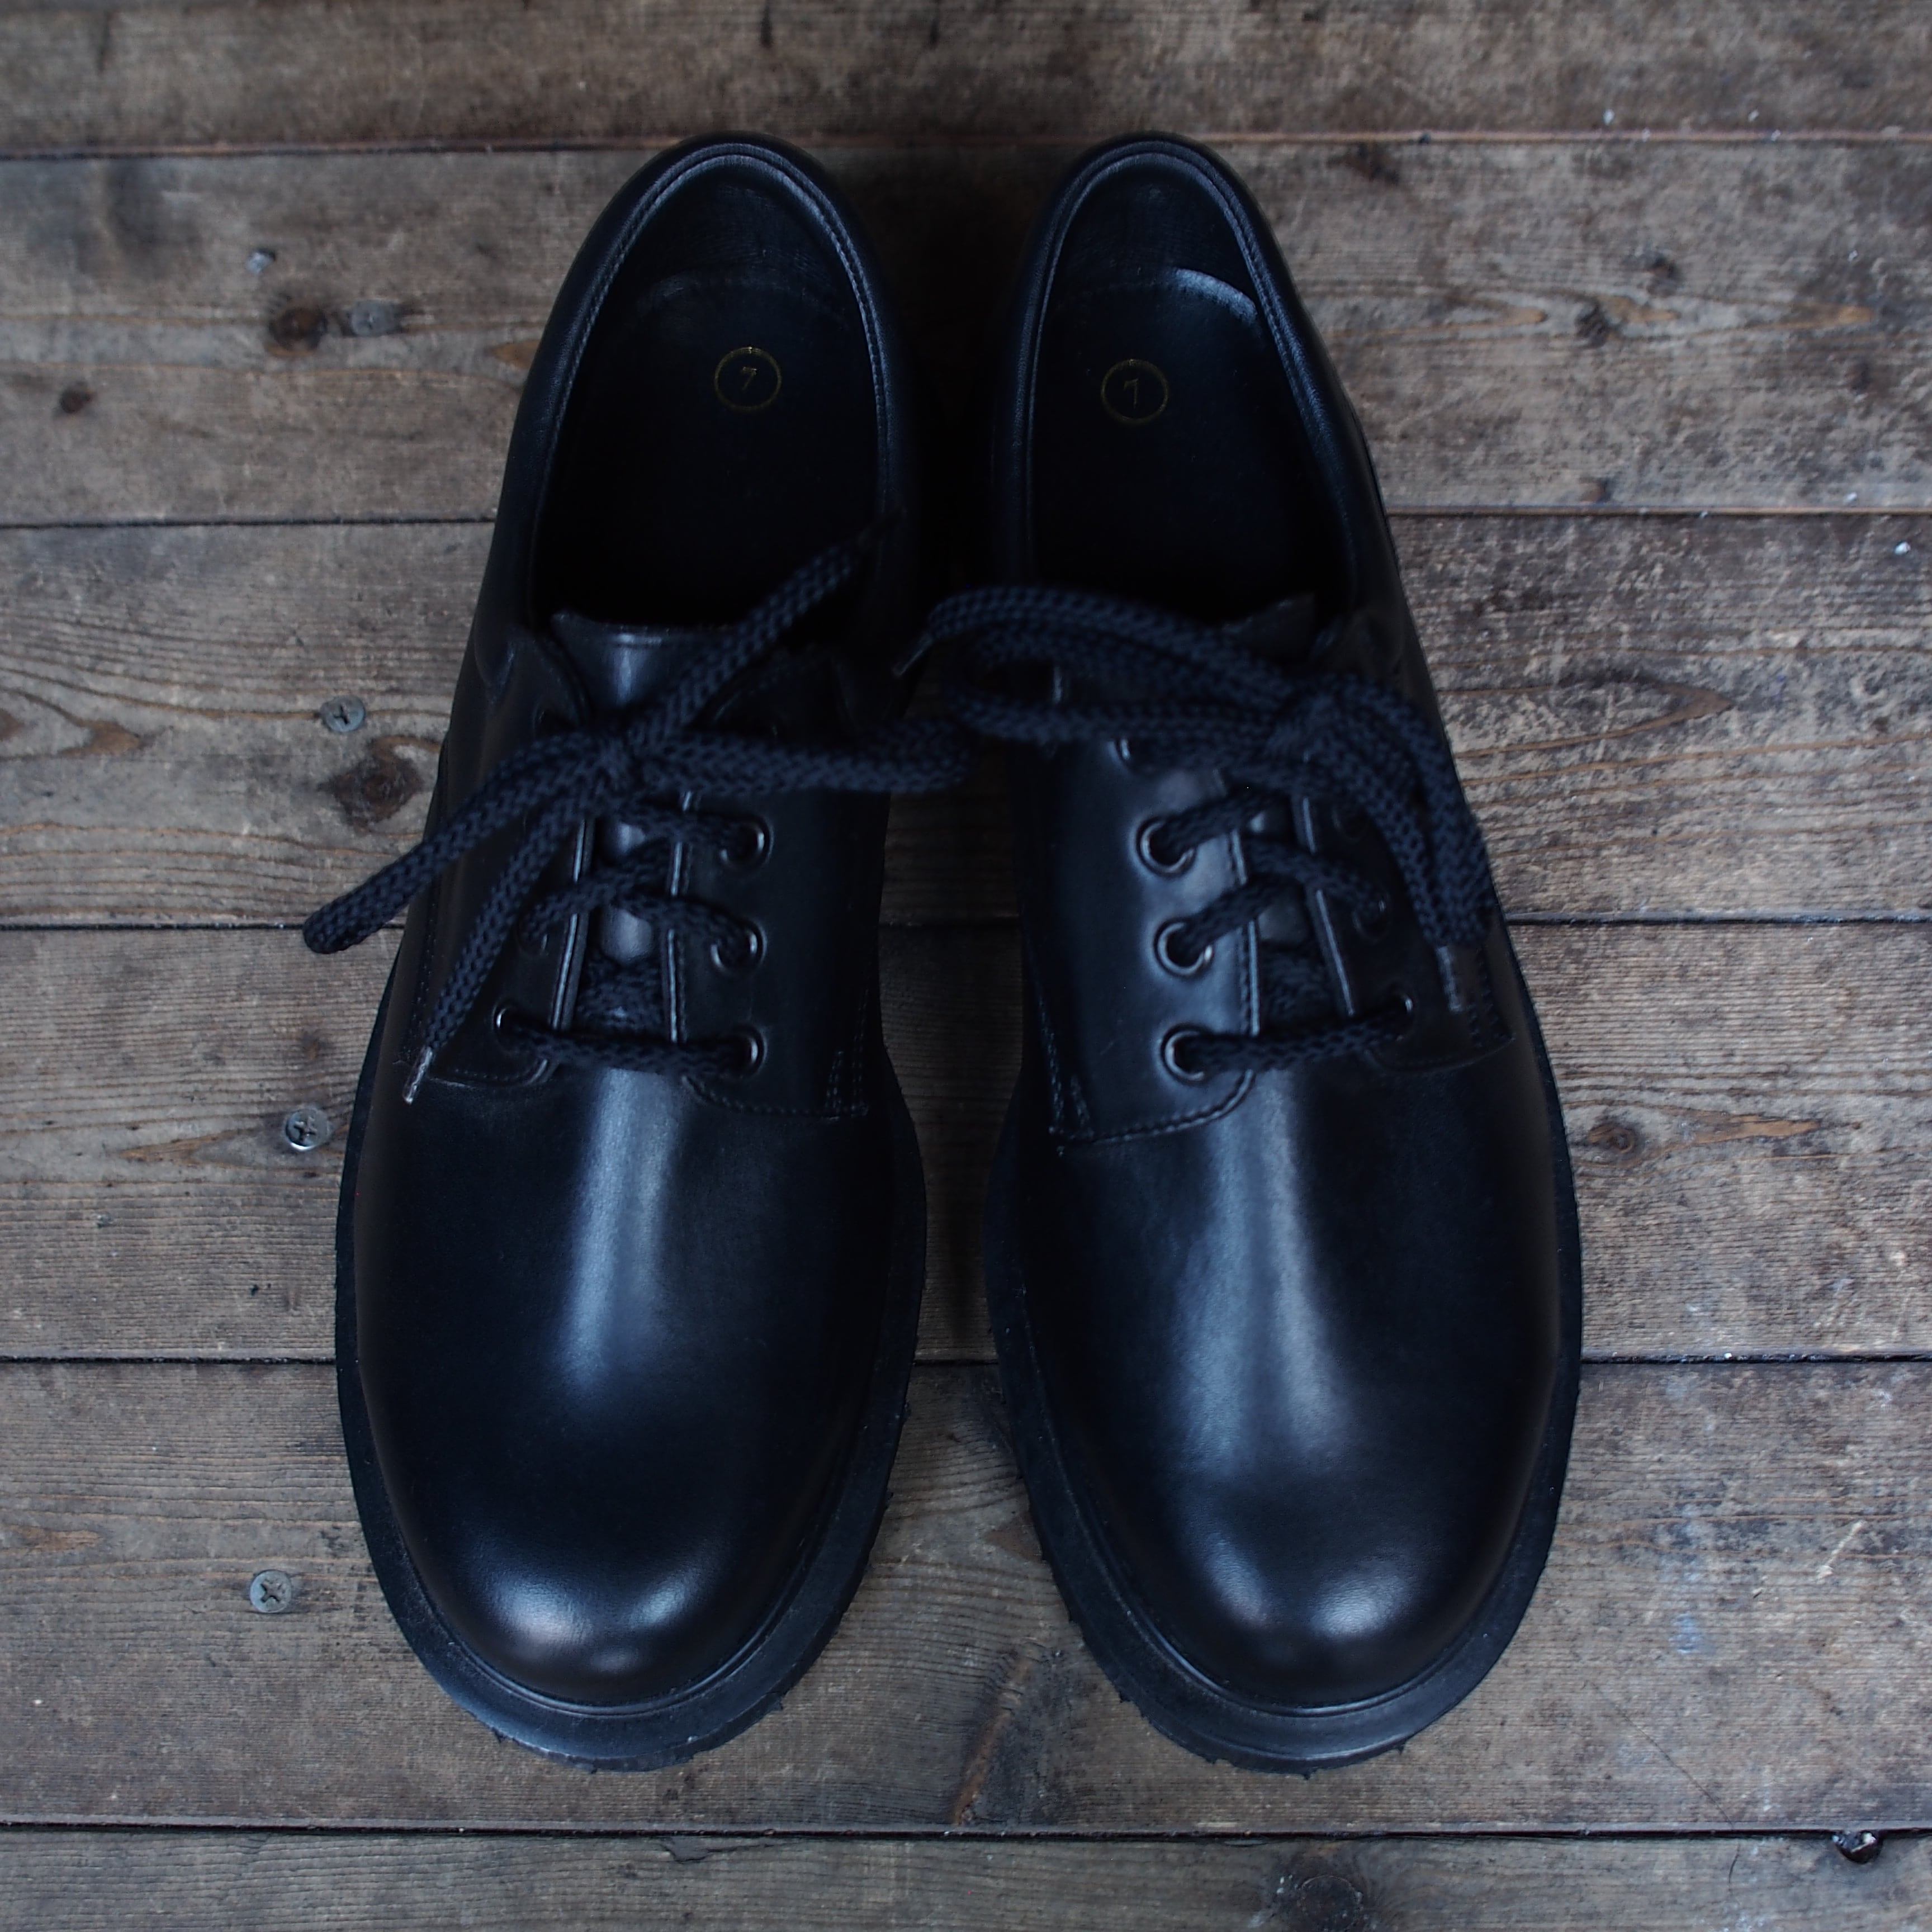 Royal Mail Postman Shoes UK 7 イングランド製 デッドストック ロイヤルメール ポストマンシューズ Dr. Martens  | LITHIUM × Clover Over Dover